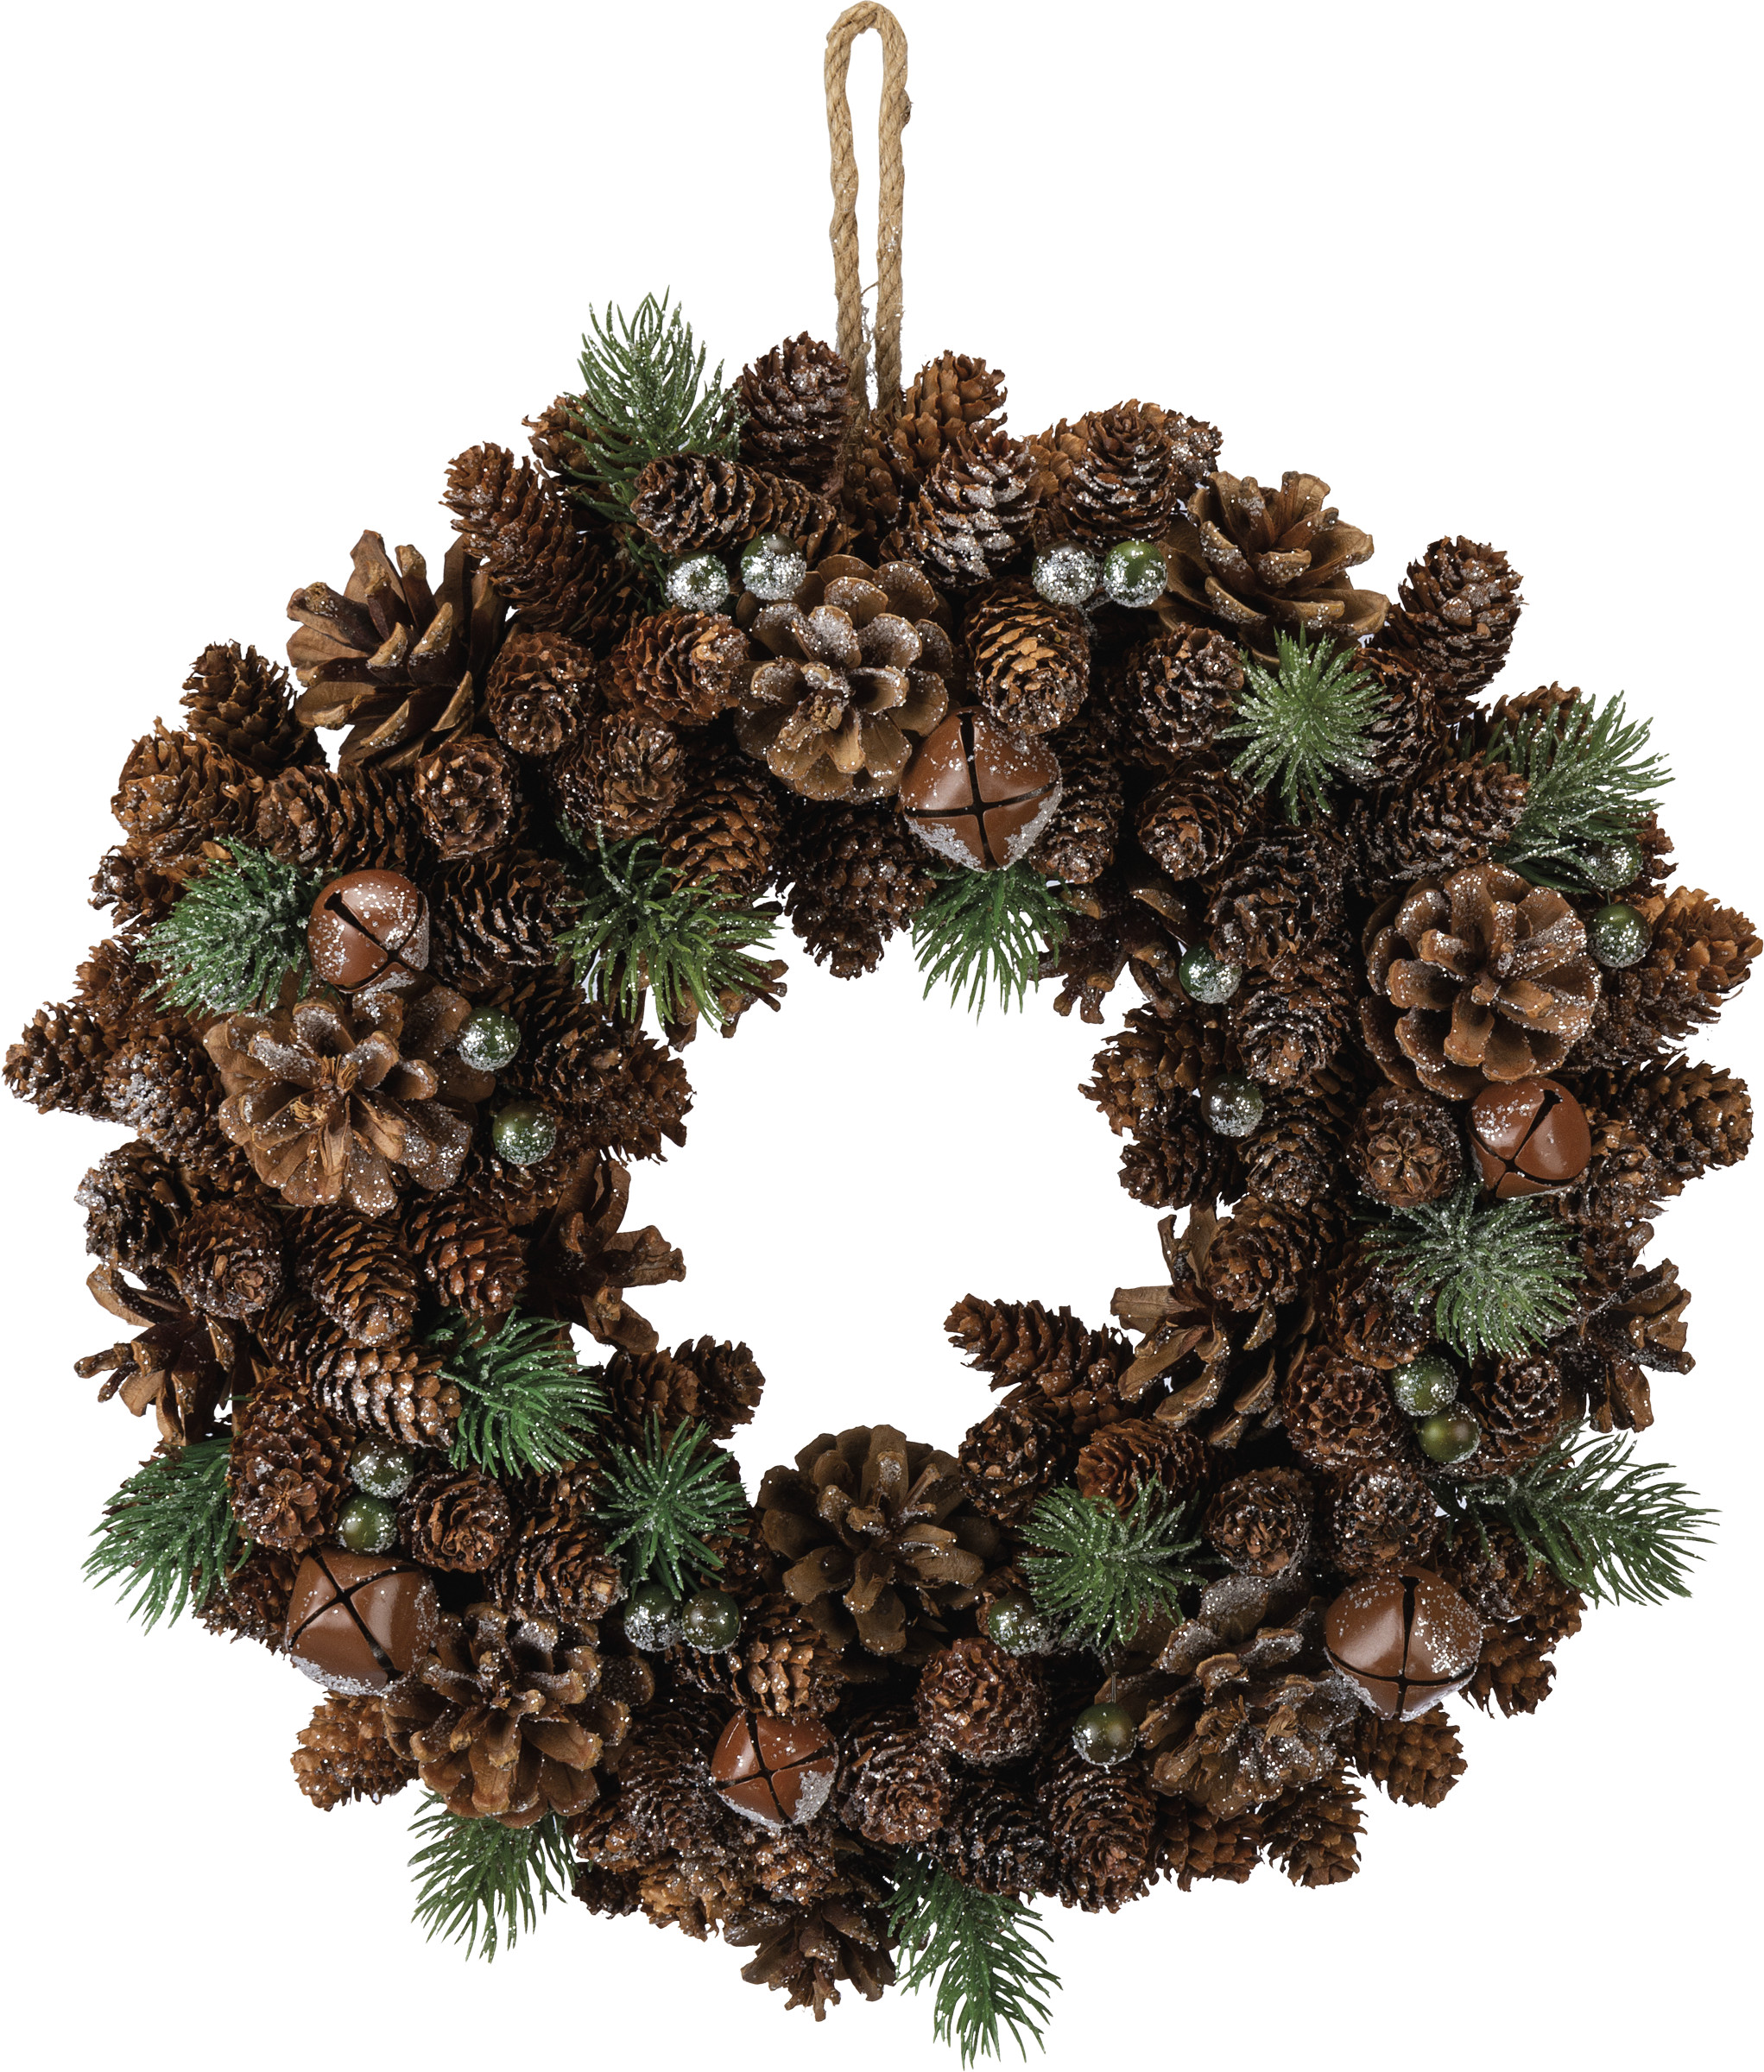 25-inch Diameter Primitives by Kathy Pine with Cones and Berries Wreath